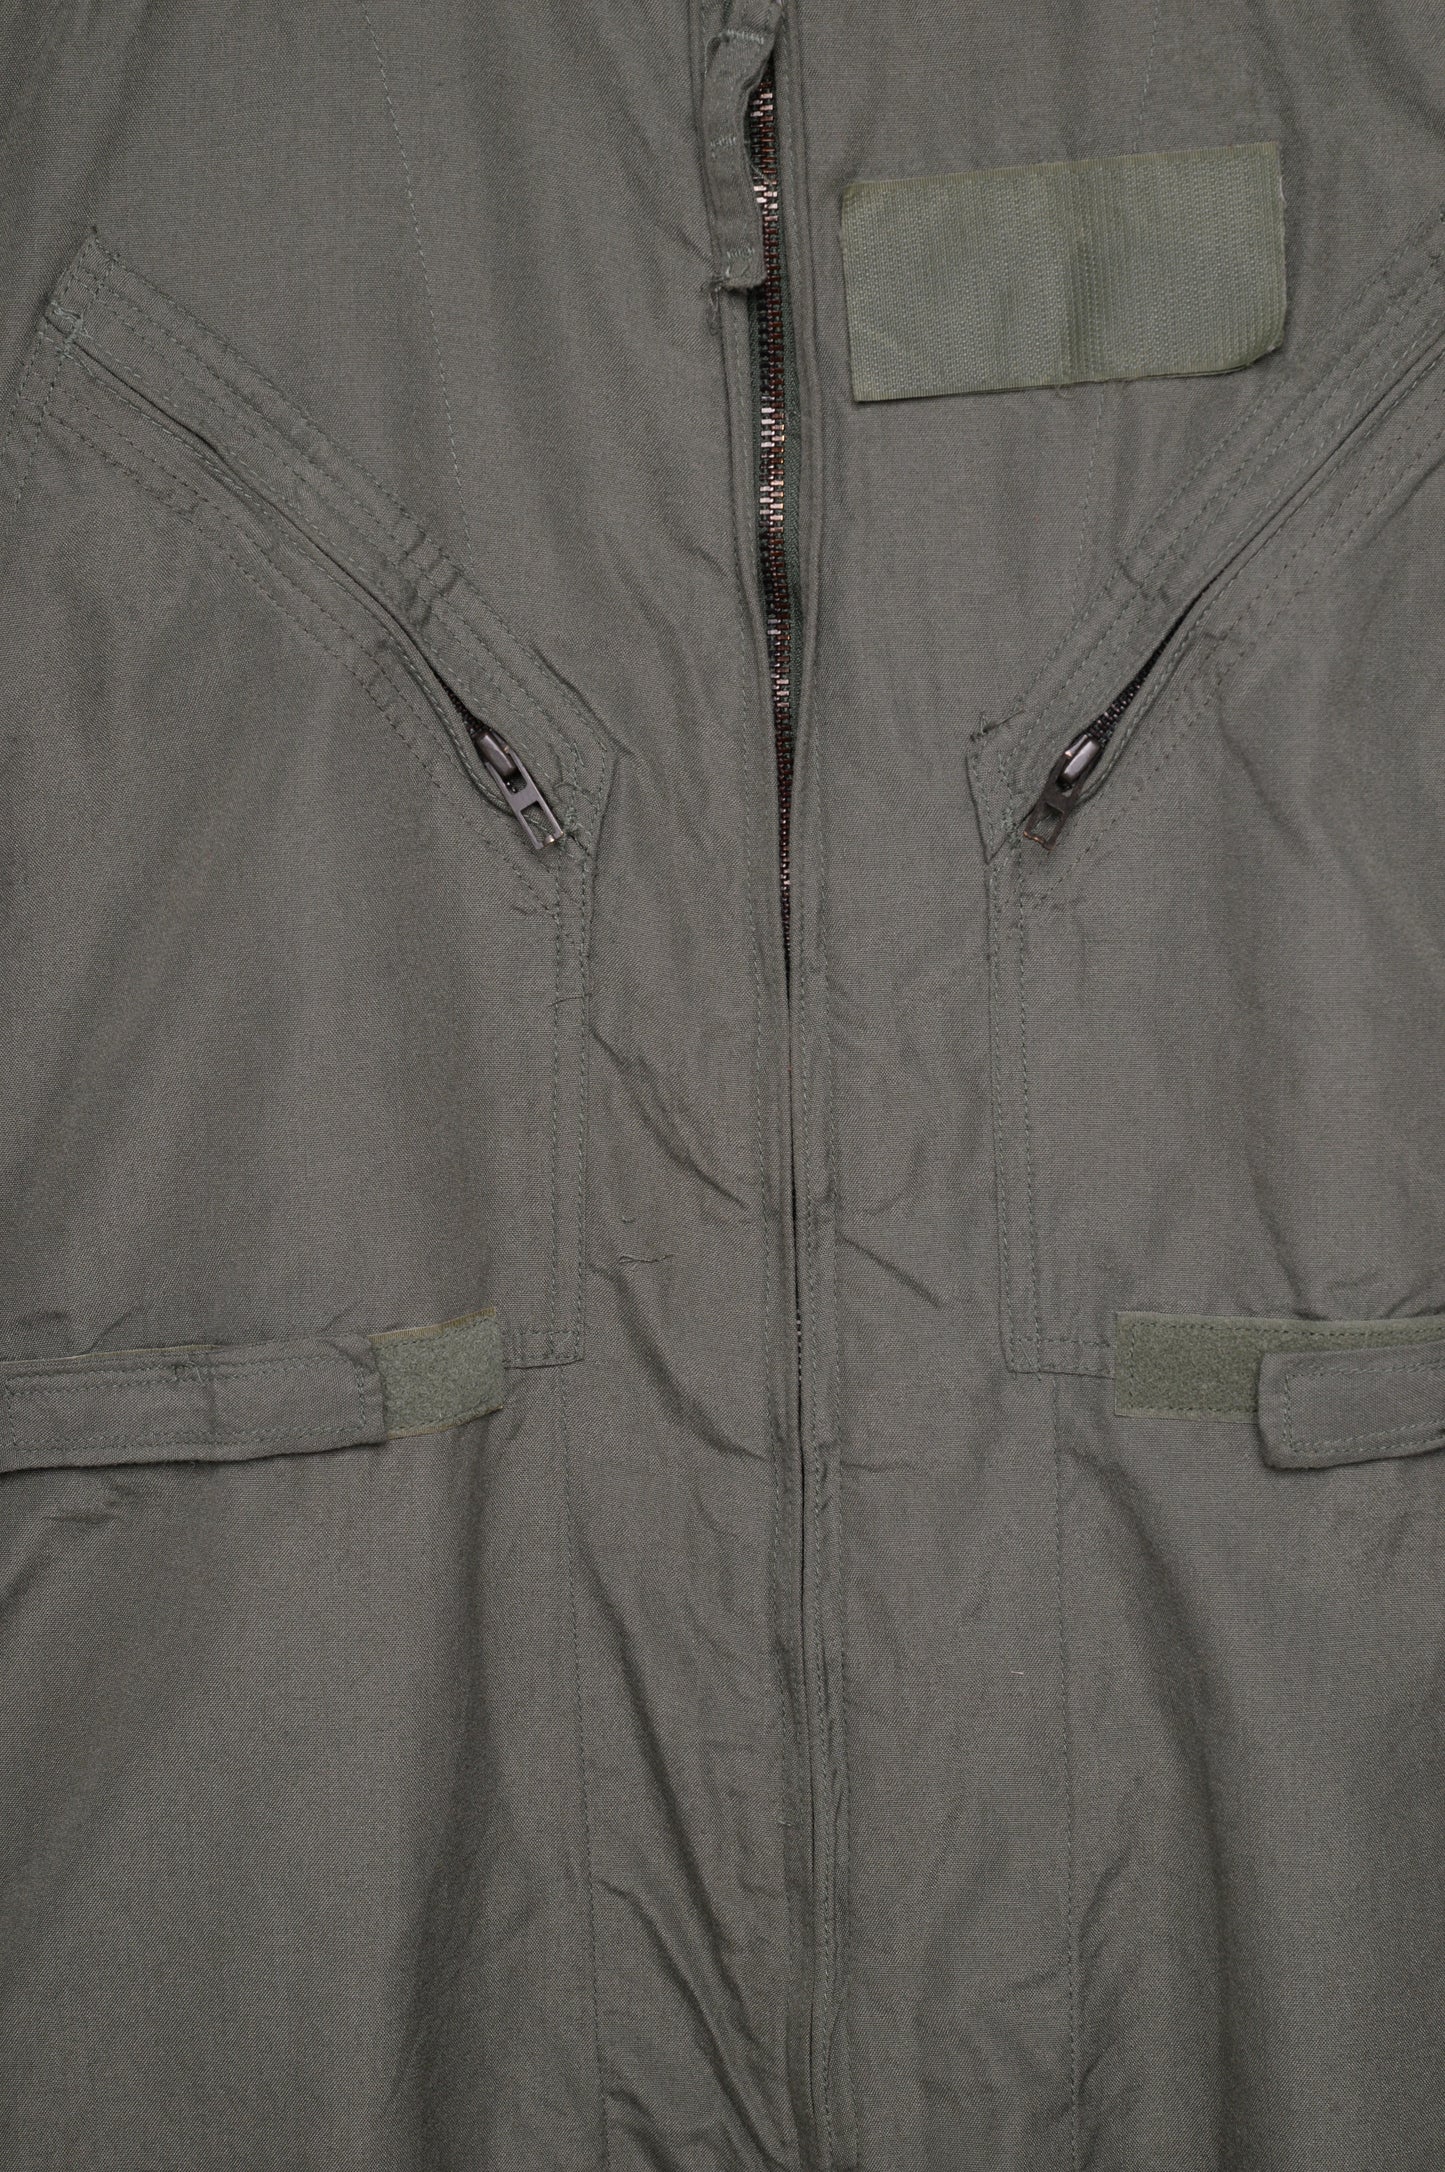 Authentic Military Coveralls